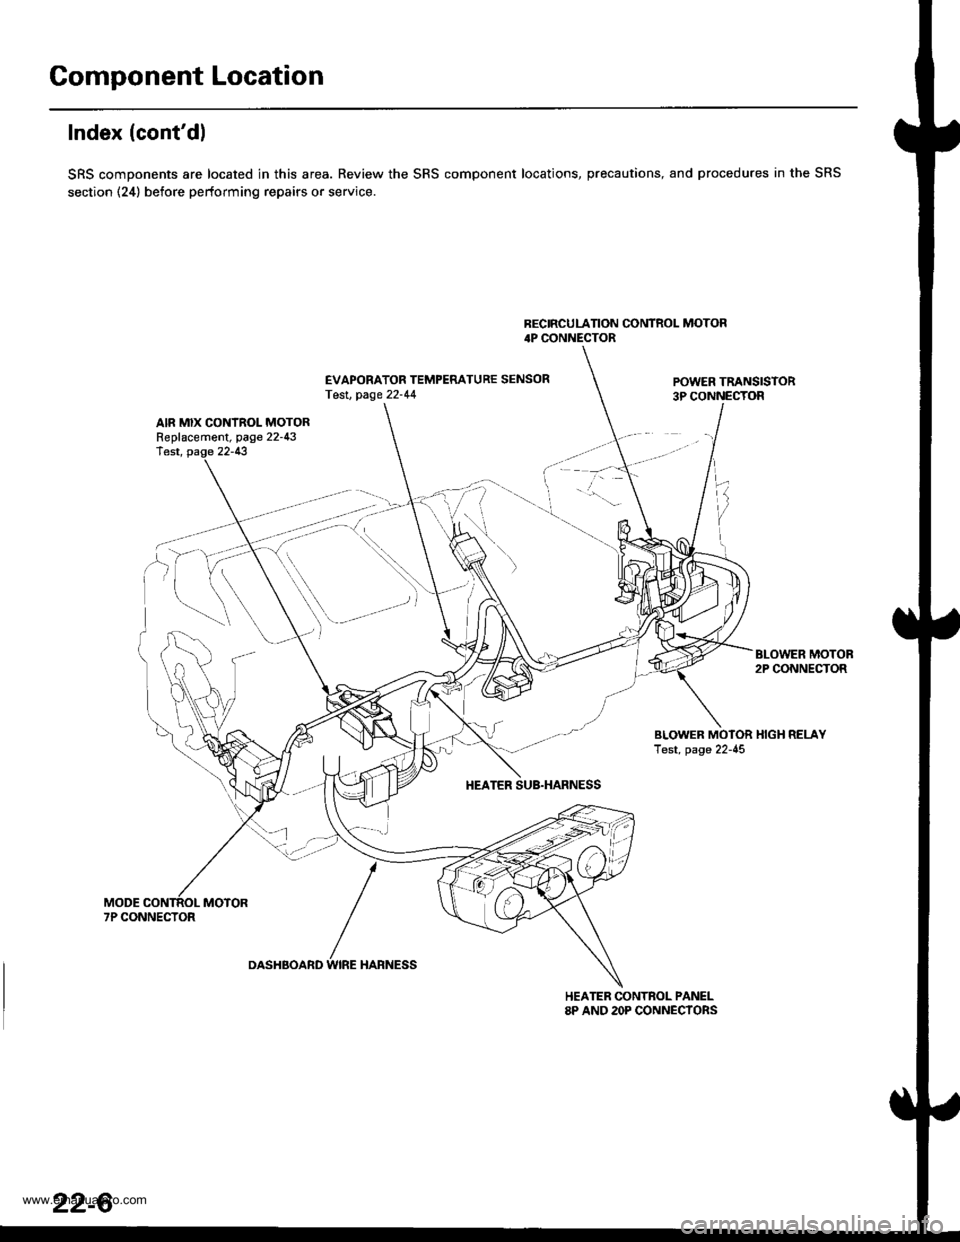 HONDA CR-V 1999 RD1-RD3 / 1.G Workshop Manual 
Component Location
Index (contdl
SRS components are located in this area. Review the SRS component locations, precautions, and procedures in the SRS
section (24) before performing repairs or service